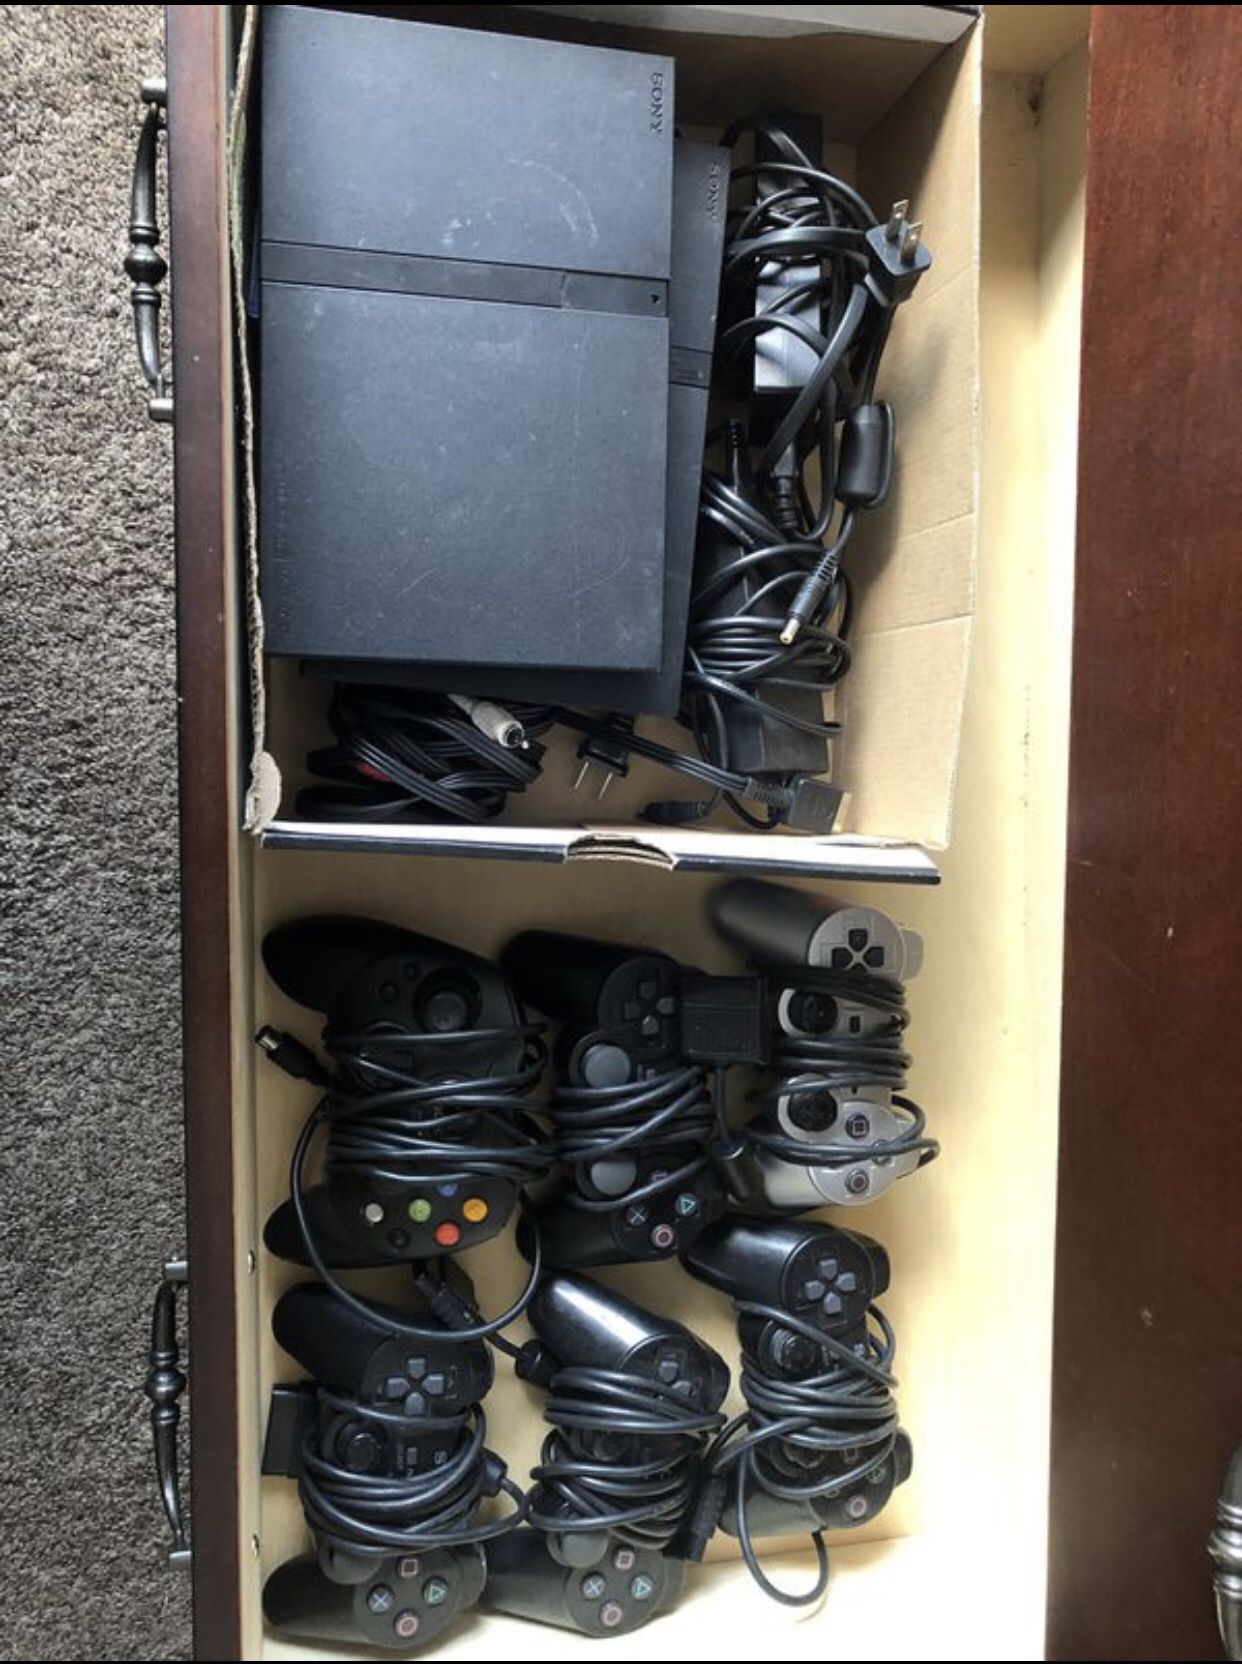 PS2 & Other Items